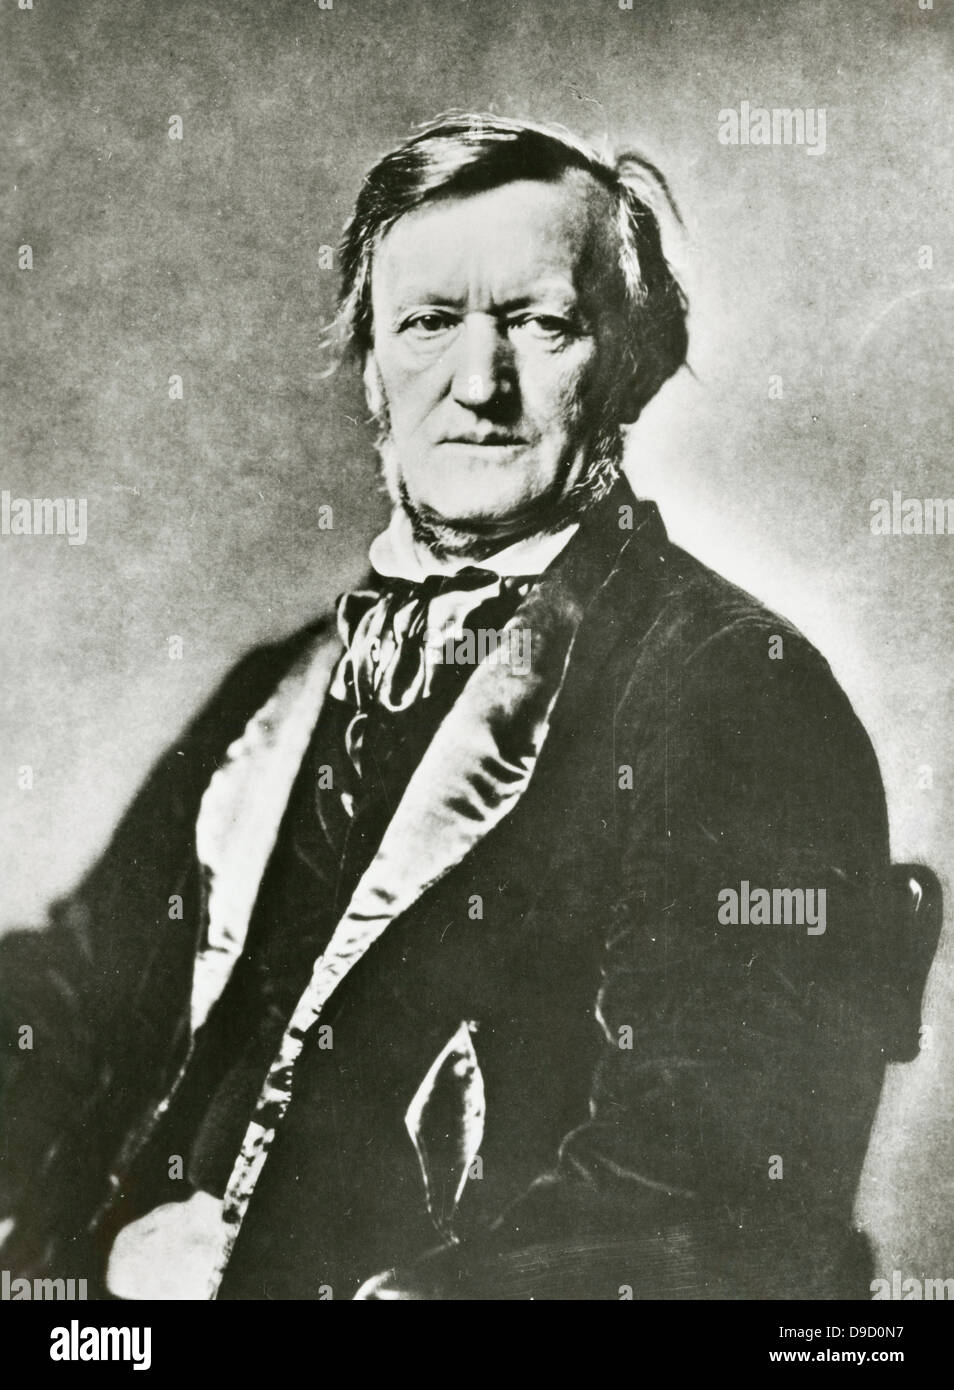 (Wilhelm) Richard Wagner (1813-1883) German composer, conductor, and theatre director. He built the Bayreuth Festspielhaus which opend in 1876 with Das Rheingold to stage his music dramas. Photograph. Stock Photo